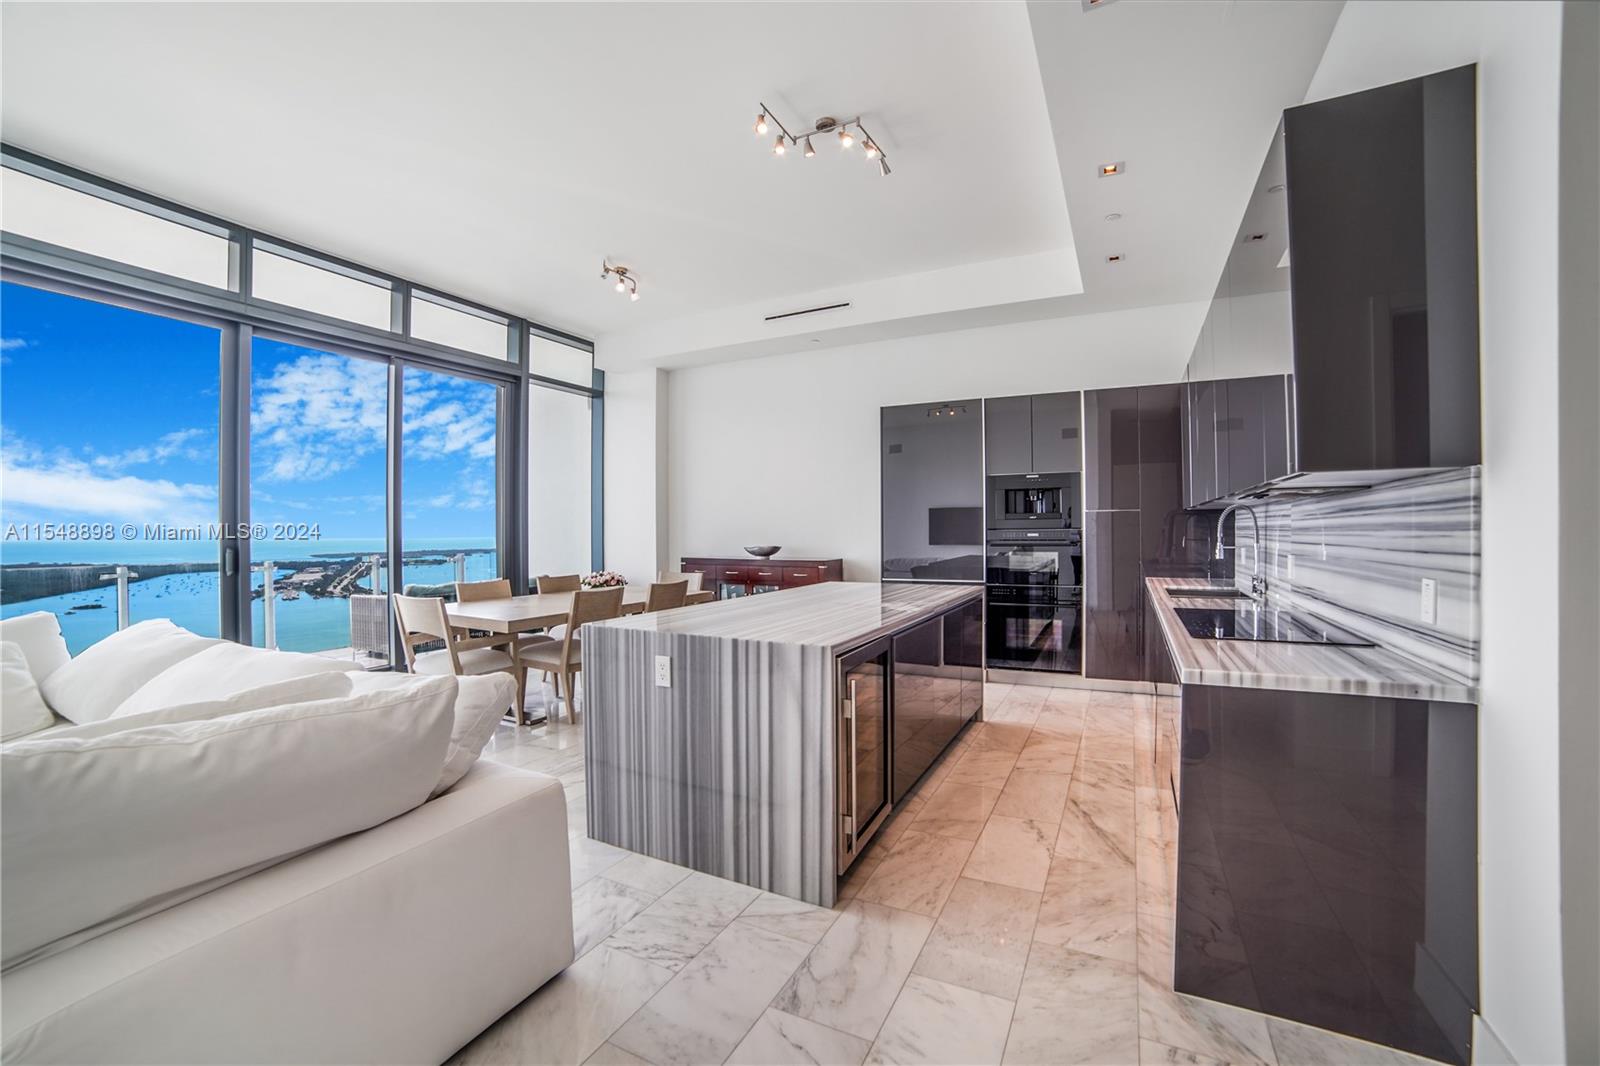 Experience mesmerizing views of Biscayne Bay and the city skyline from this lower PH corner unit in Echo Brickell featuring 3 bedrooms + den/3.5 baths, complemented by oversized terraces throughout. This sunlit unit features exceptionally high ceilings, floor-to-ceiling impact doors and windows, and a spacious primary bedroom with its own private terrace. Enjoy top of the line Wolf & Subzero appliances, espresso machine, and outdoor kitchen equipped with an electric BBQ and ice maker. Echo stands out as one of Brickell's most prestigious and intimate buildings, home to just 172 residences all benefiting from an array of world class amenities such as an infinity pool deck area offering f&b service, a gym, 24/7 concierge and security team, and close proximity to the vibrant city core.